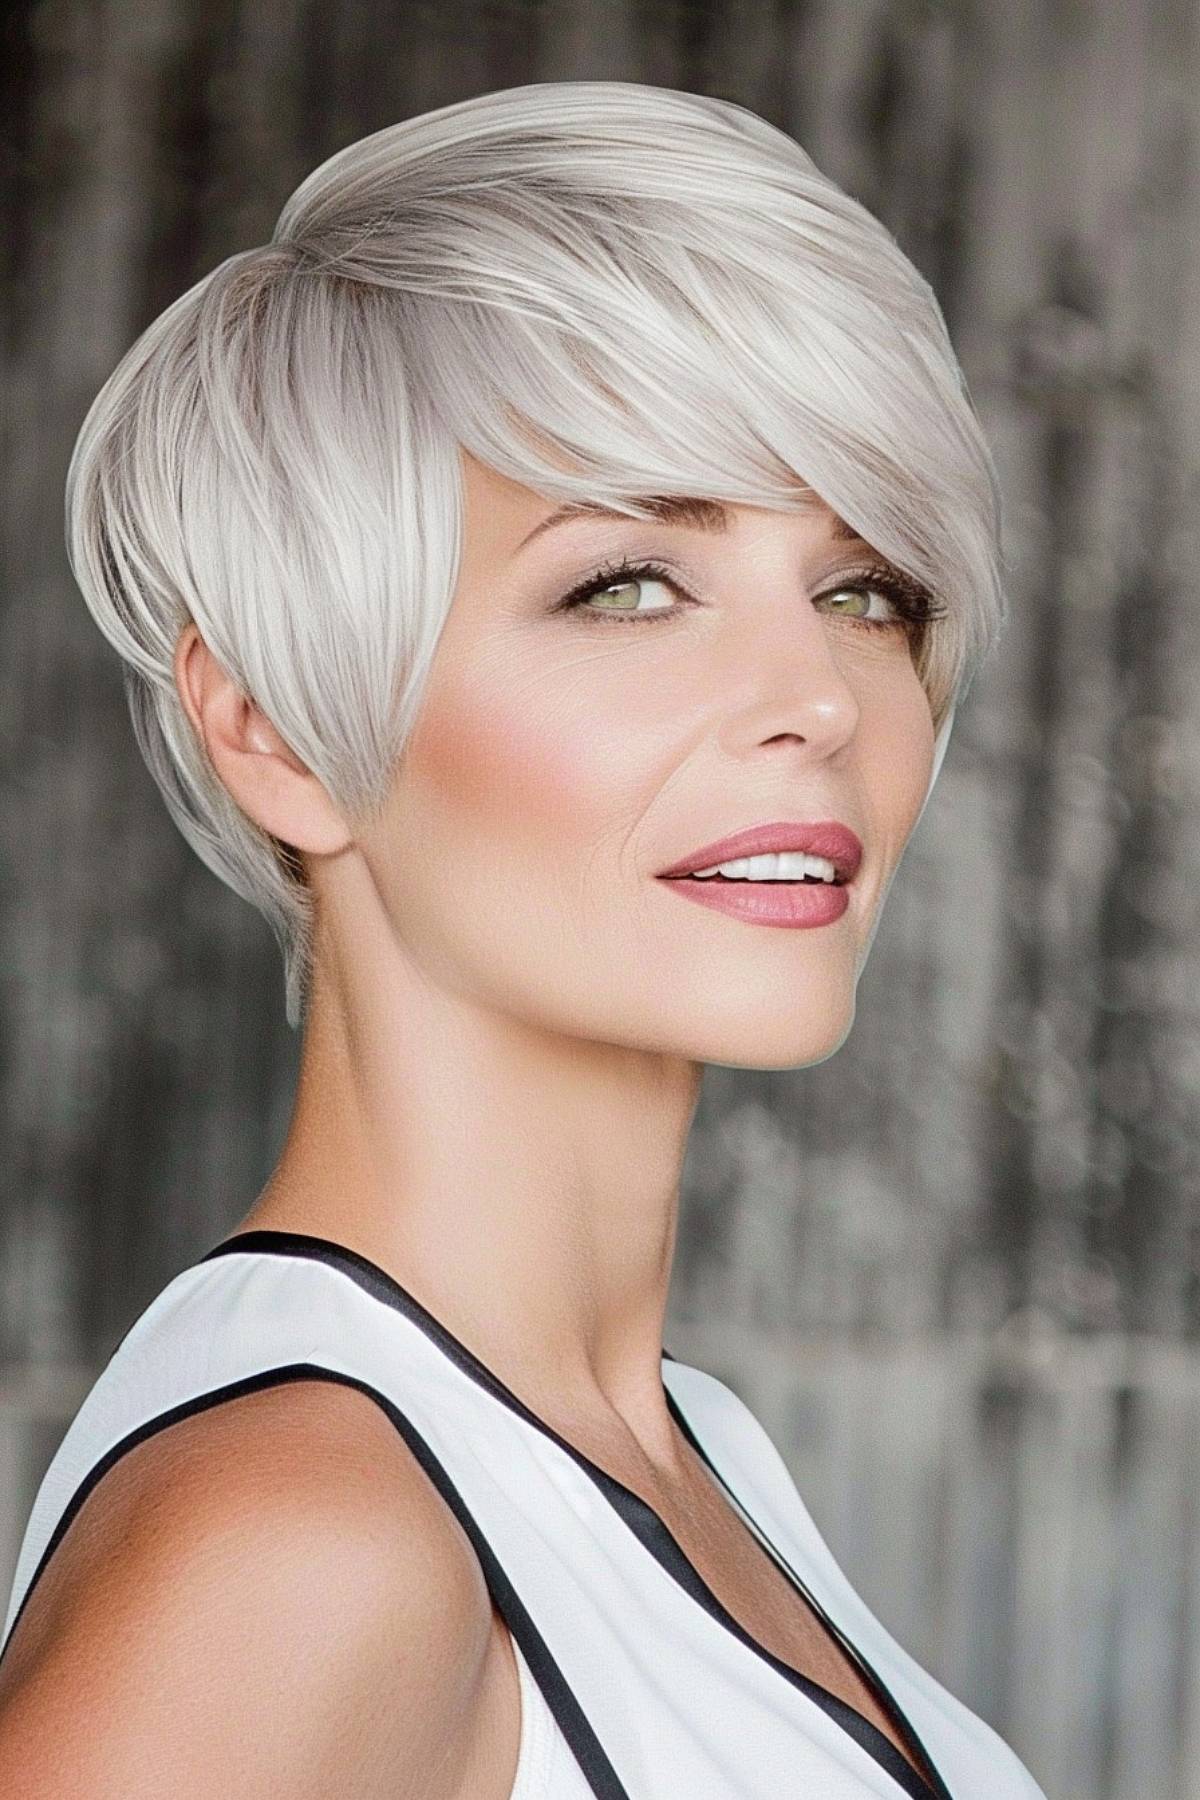 A chic angled pixie cut for women over 60, it exudes timeless elegance and is easy to style.